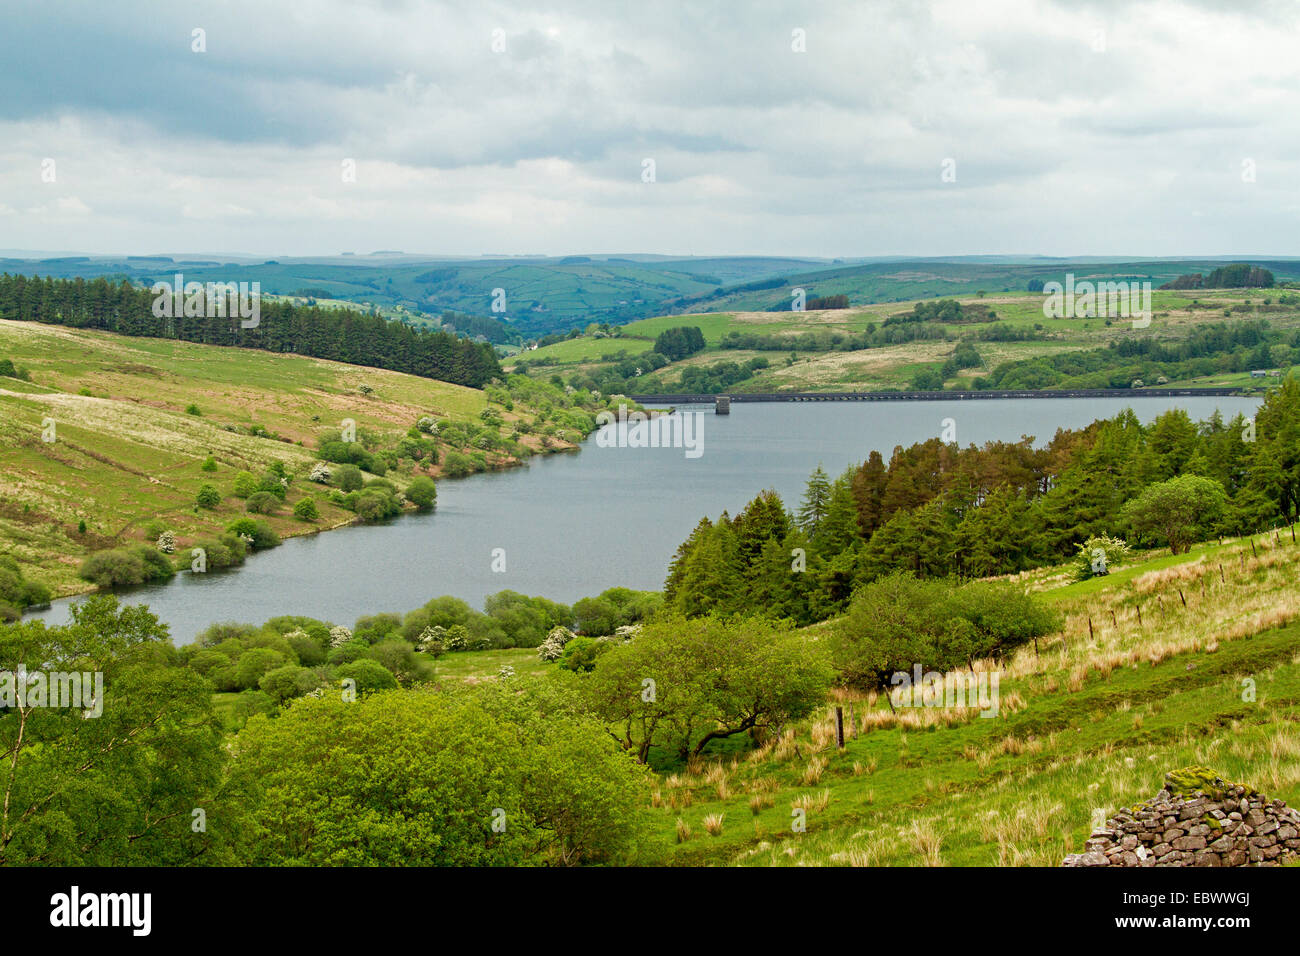 Welsh landscape, lake of Cray Reservoir in valley surrounded by trees & fields of golden grass in Brecon Beacons National Park Stock Photo